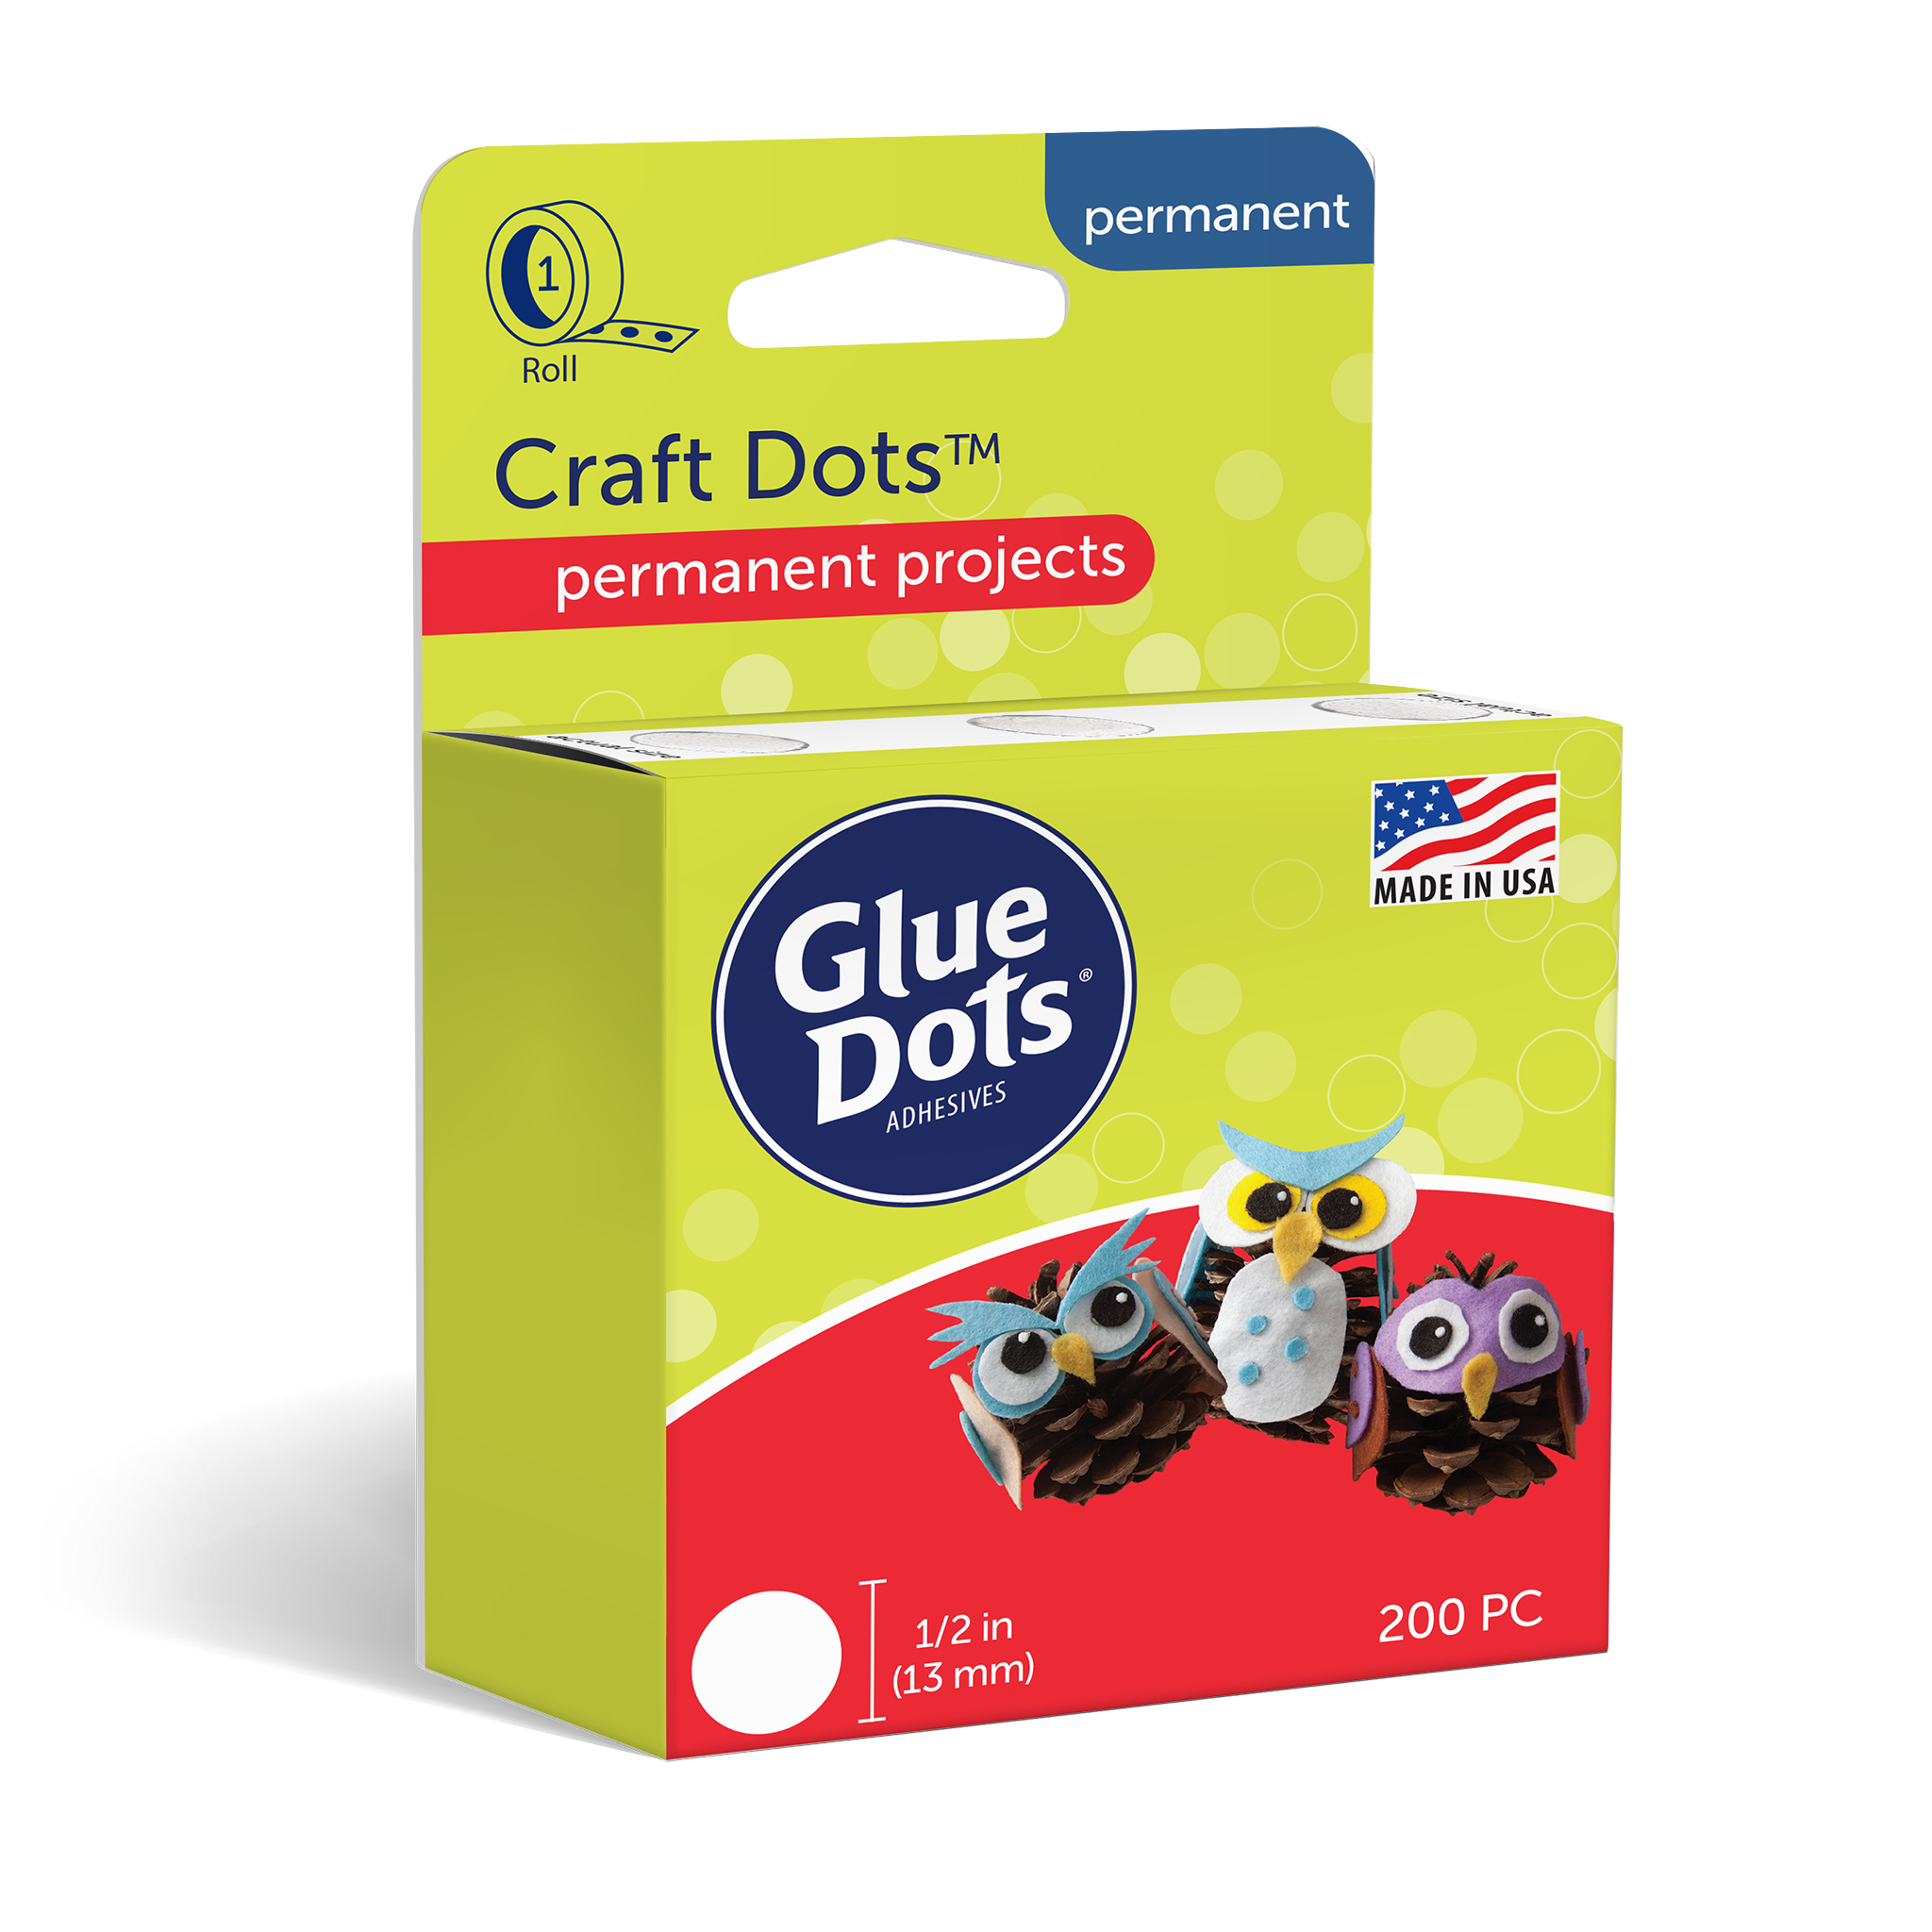 Glue Dots, Crafter's Pack, Double-Sided, Mini Dots, Craft Dots, Micro Dots, Permanent, 825 Dots, DIY Craft Glue Tape, Sticky Adhesive Glue Points